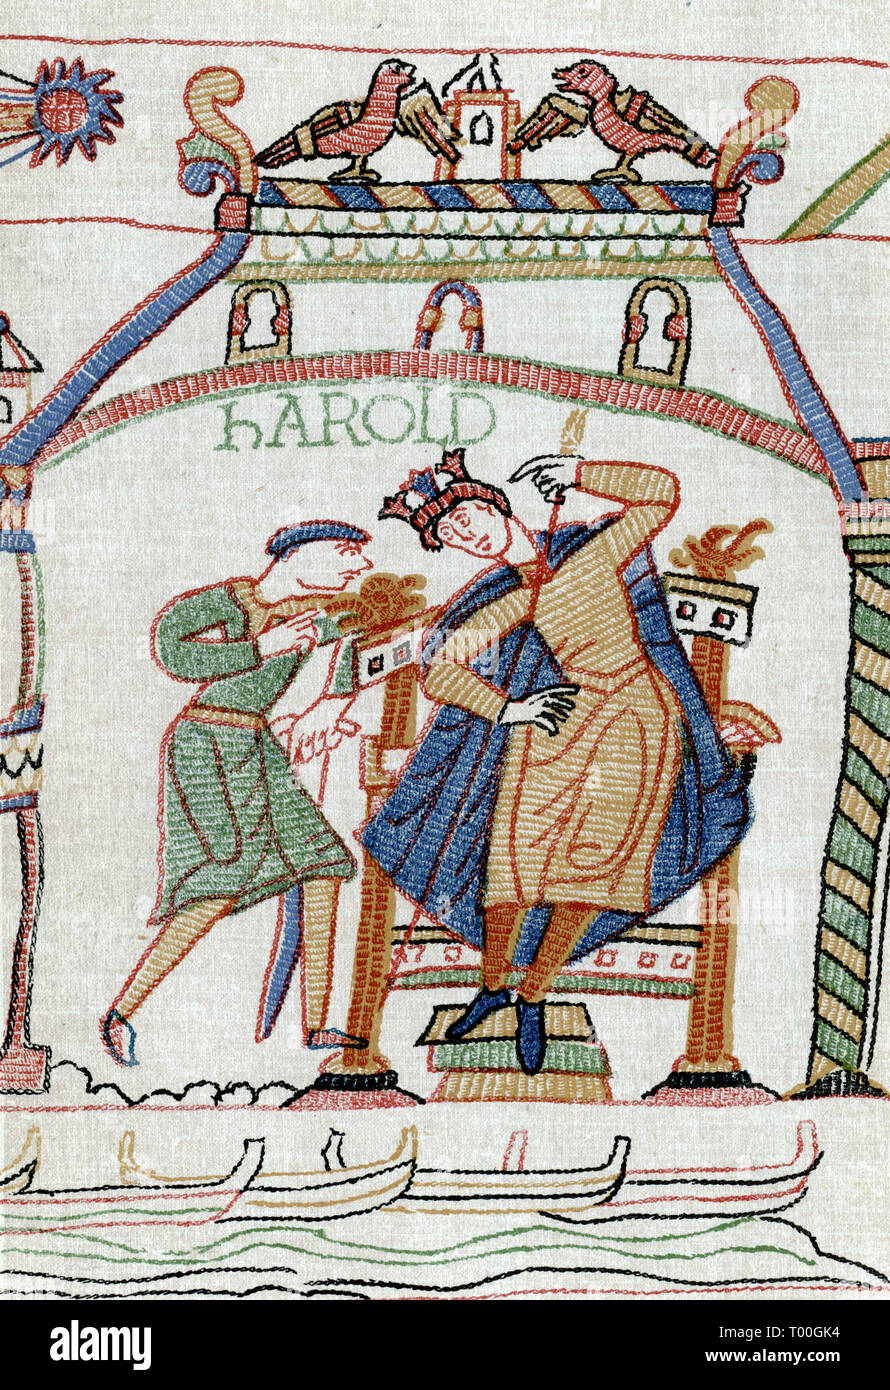 Harold told of the Comet. News of Halley's Comet is brought to Harold Godwinson (c1022-1066). The comet can be seen in the top left of this detail from the Bayeux Tapestry. People considered the comet an evil omen. The Bayeux Tapestry is an embroidered cloth measuring approx 70 metres (230 ft) long and 50 centimetres (20 in) tall. It depicts the events leading up to the Norman conquest of England concerning William, Duke of Normandy, and Harold, Earl of Wessex, later King of England, and culminating in the Battle of Hastings. Stock Photo